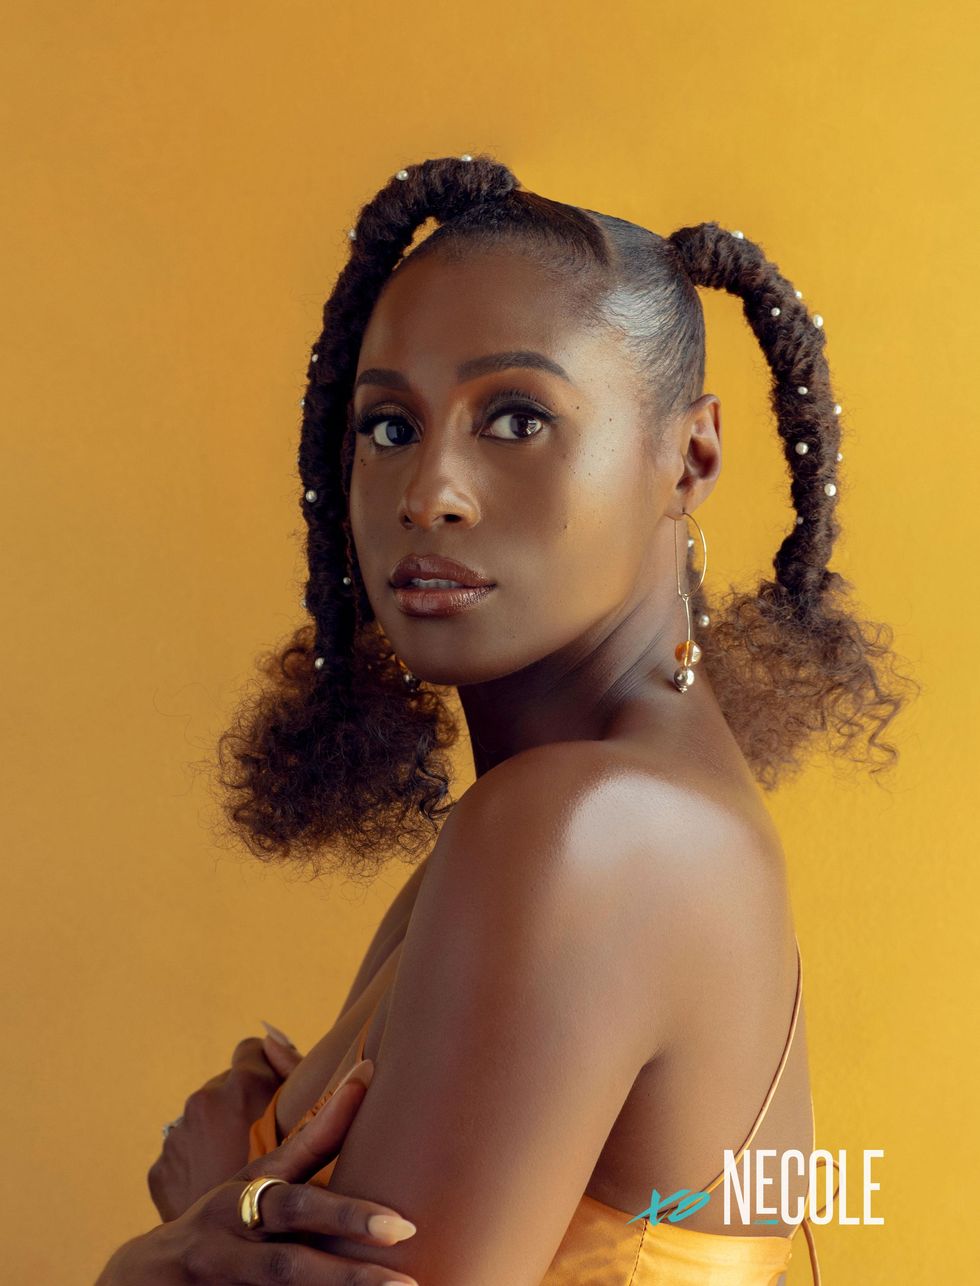 A Black woman, Issa Rae, stands to the side and looks over her shoulder, straight into the camera. Her mouth is partially open. Her arms are folded across her chest. Her hair is in four unicorn braids with curly ends and white pearls